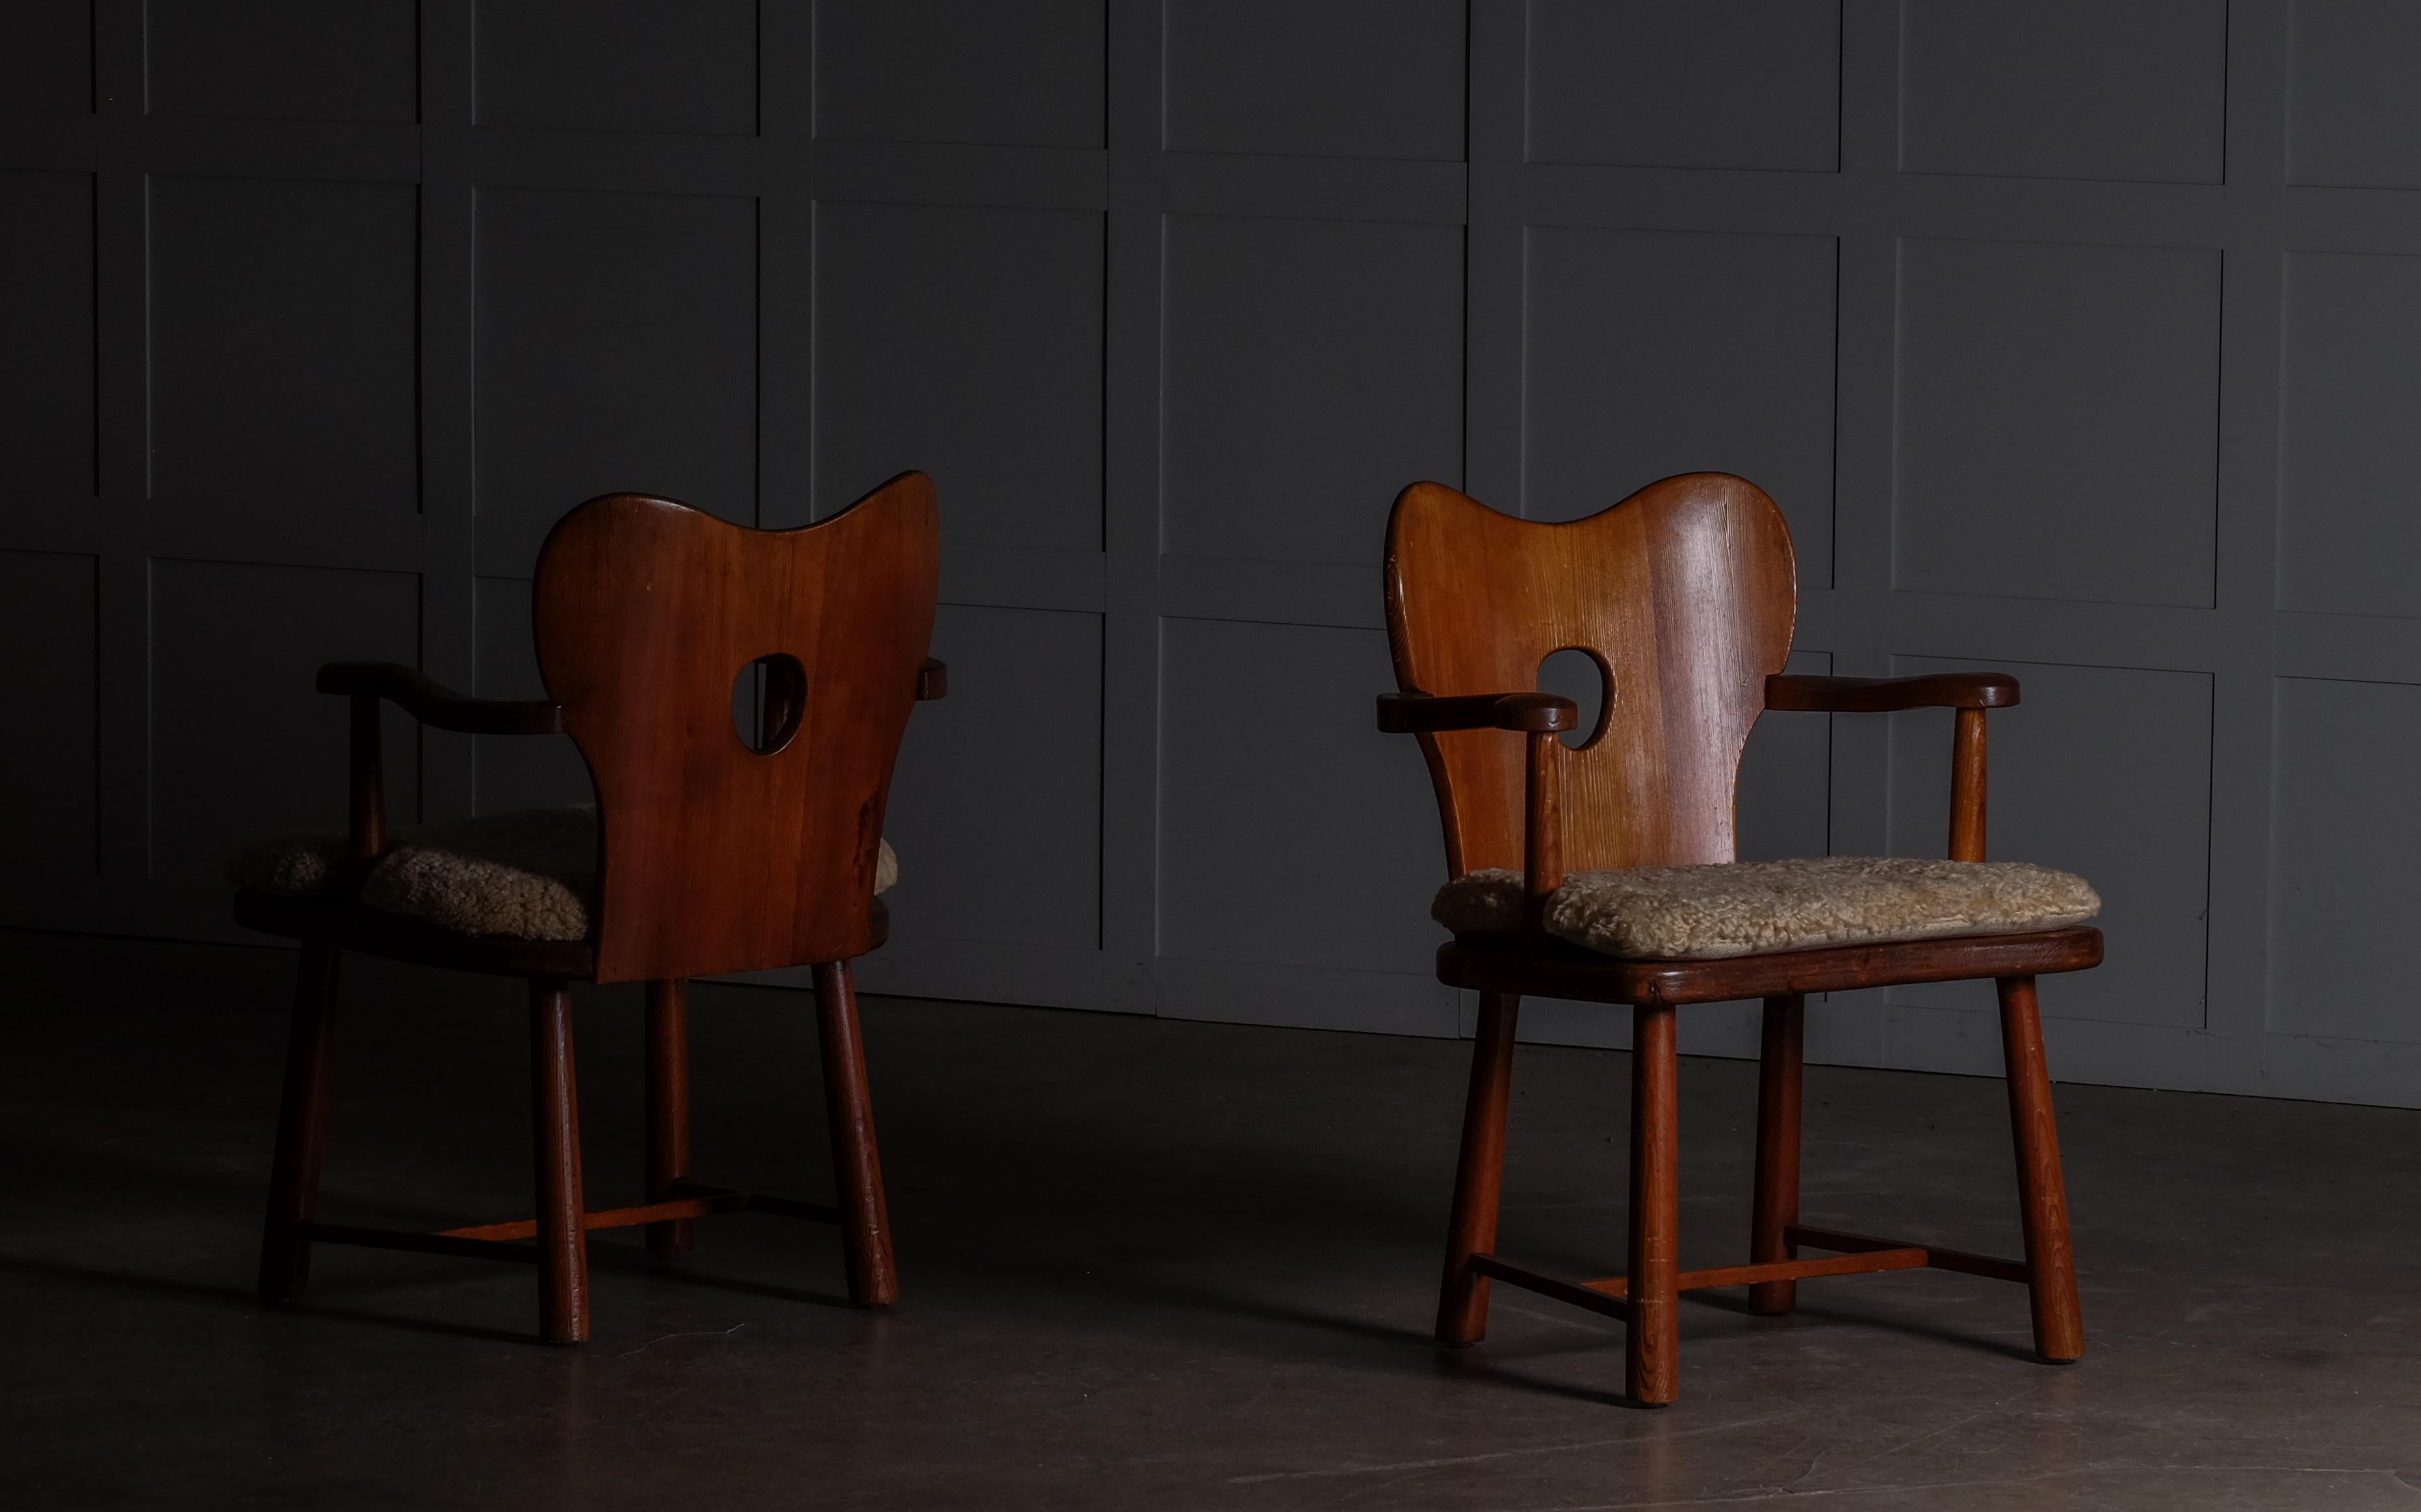 Rare pair of armchairs by Bo Fjaestad, Sweden, 1930s.
Original condition. New seat cushions in honey colored sheepskin.